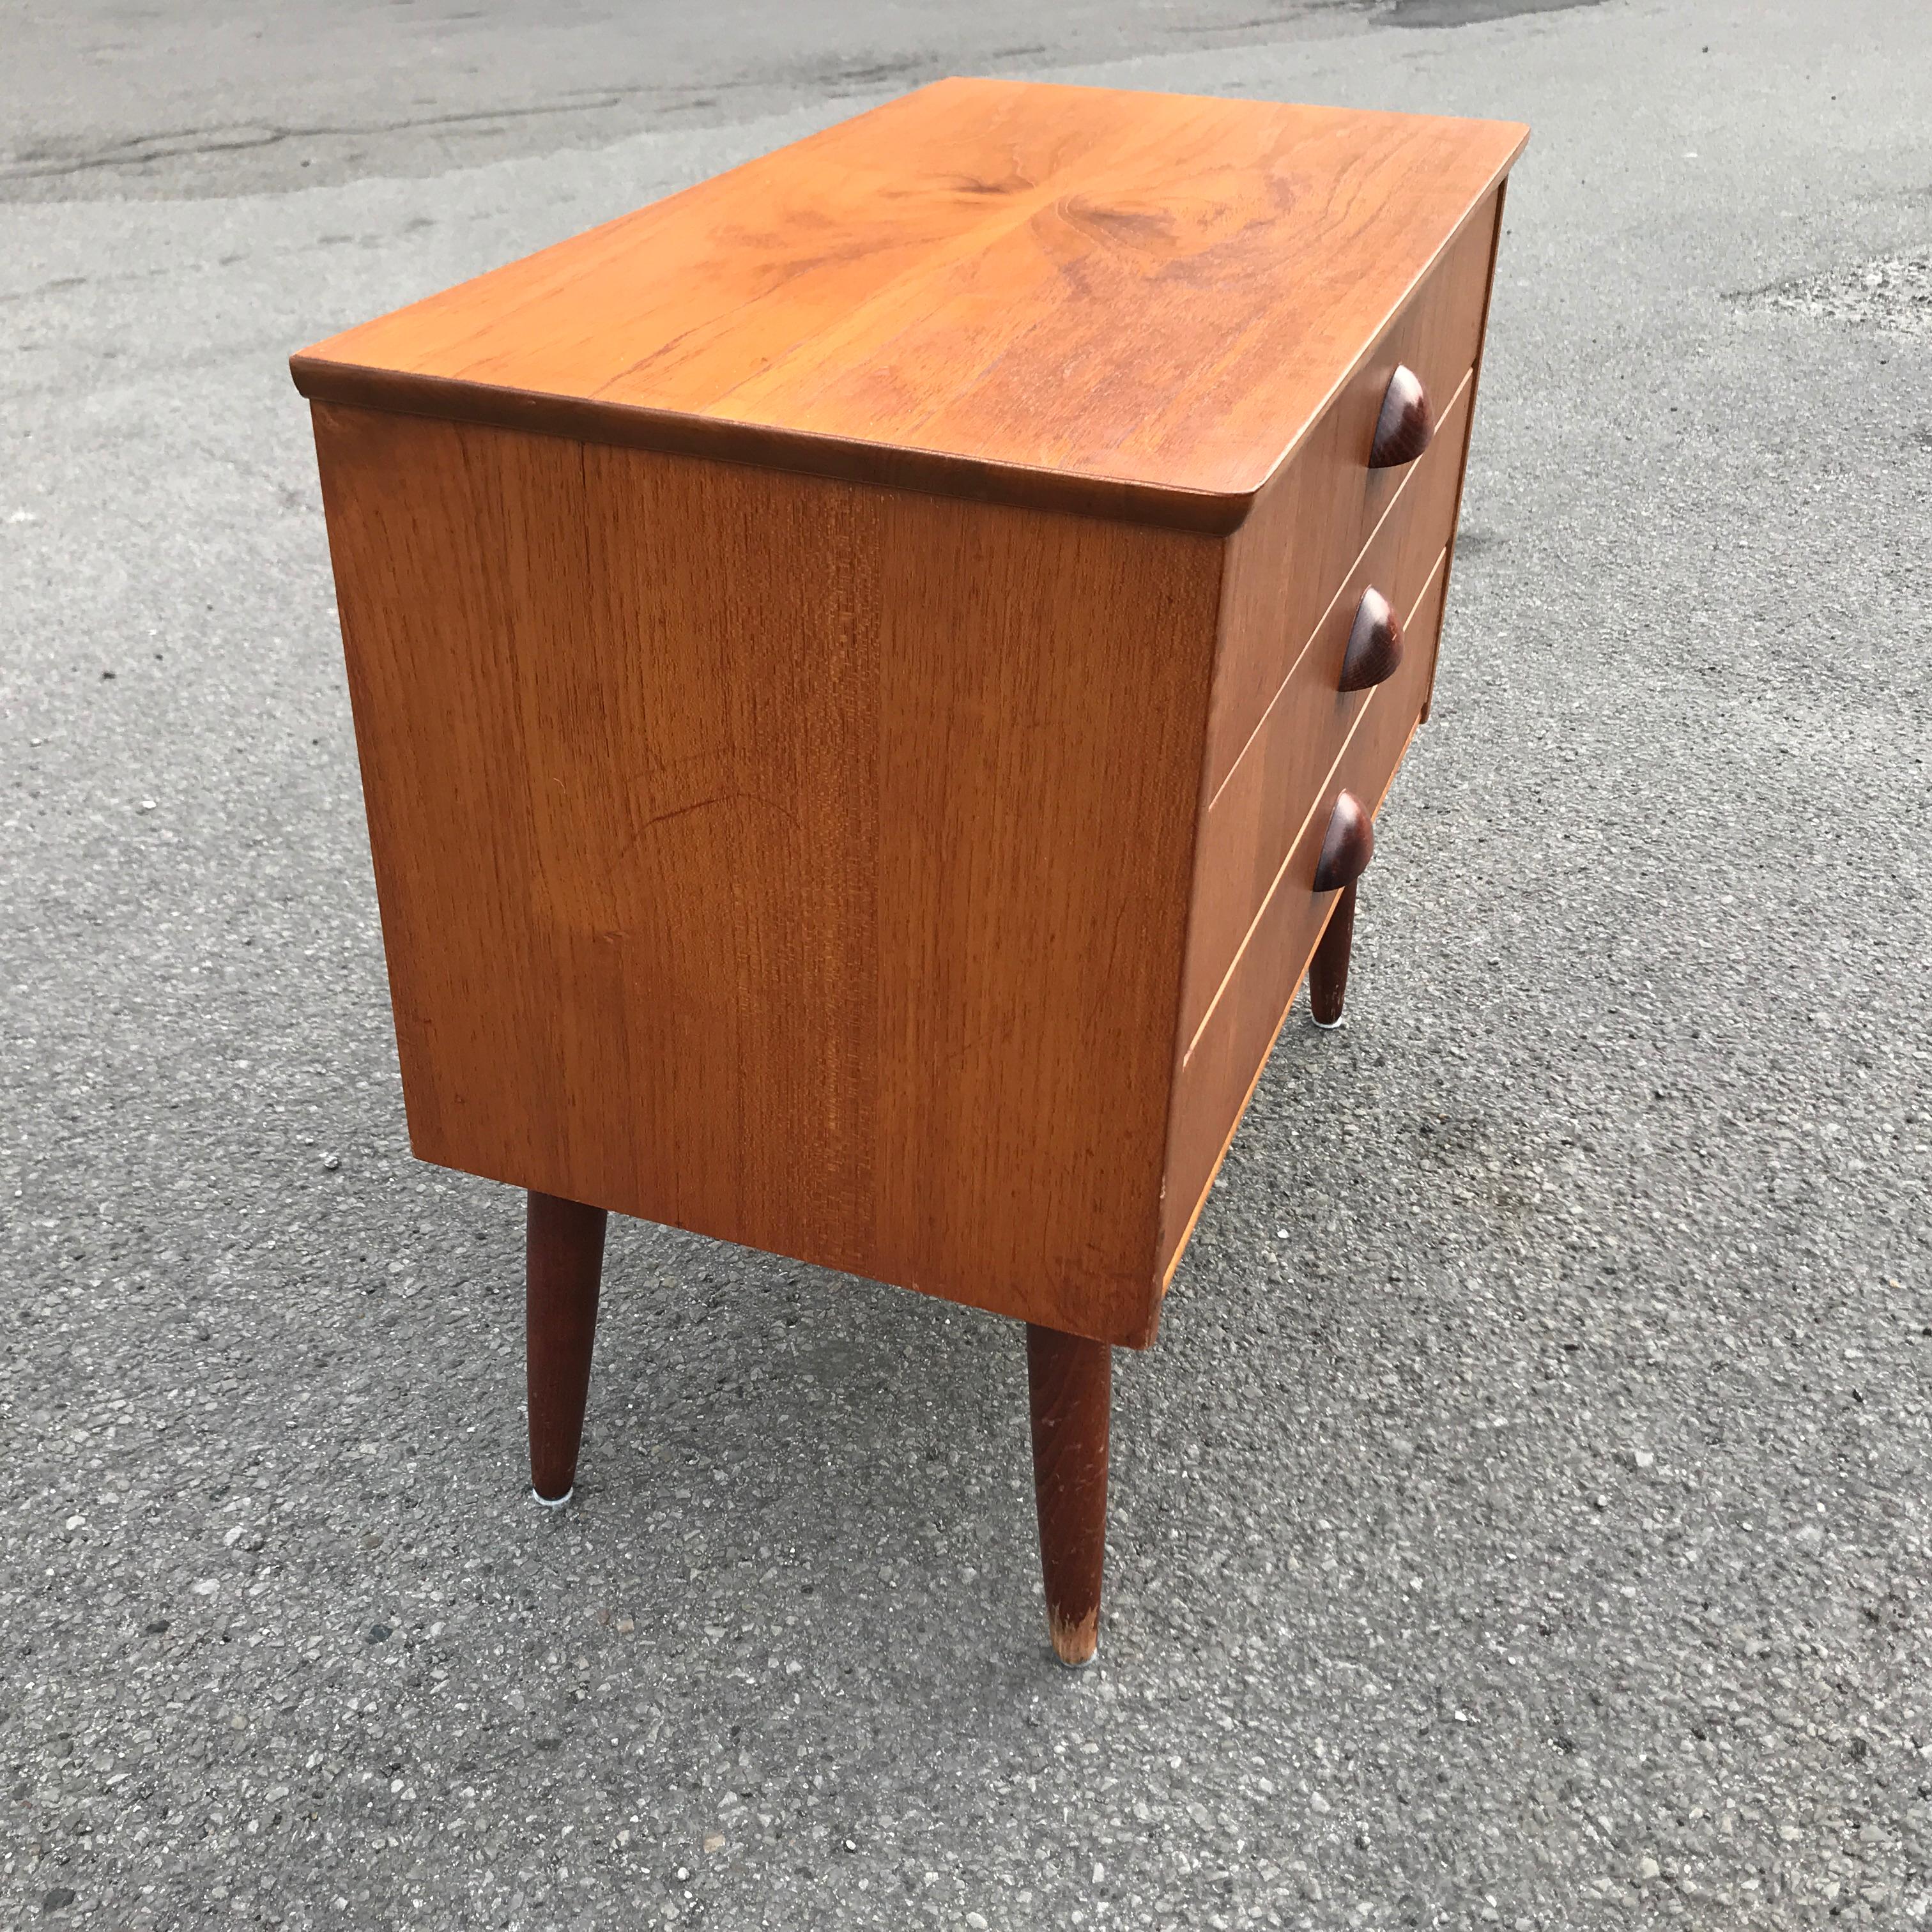 Danish teak dresser from the 1960s. Simple and functional.